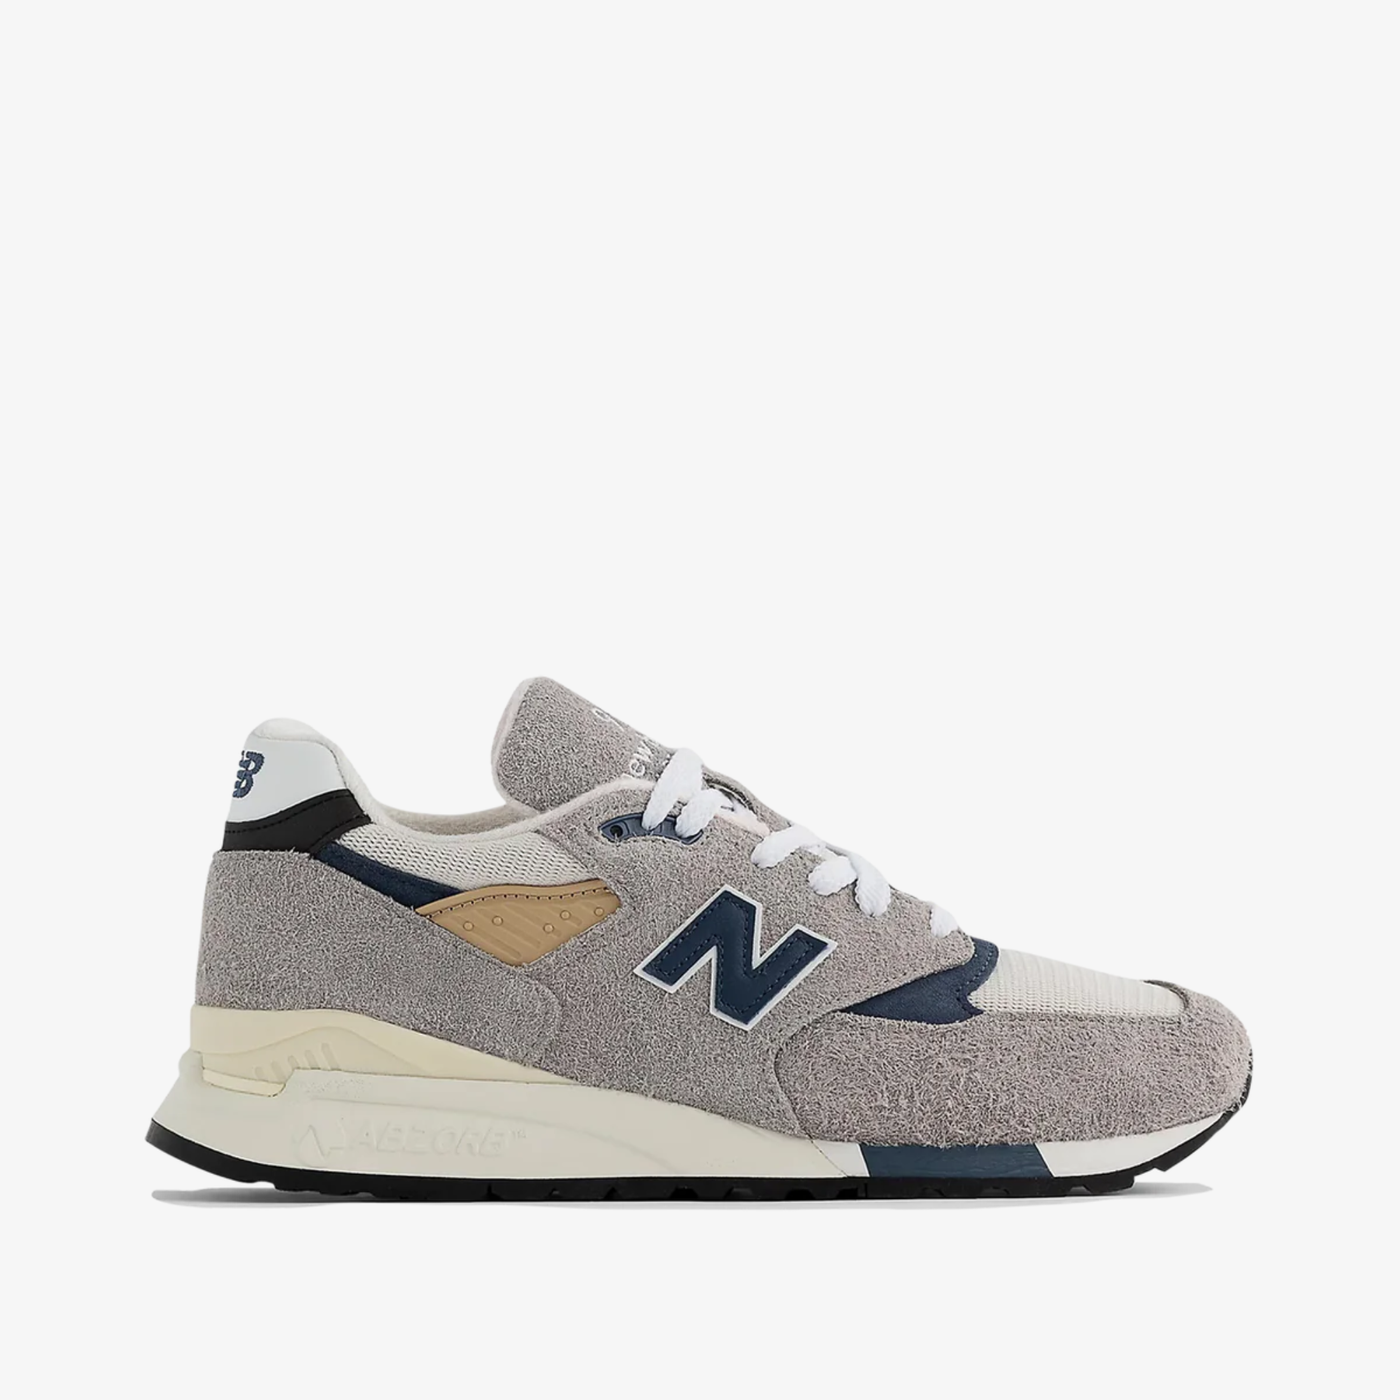 UNISEX NEW BALANCE 998 "MADE IN USA Marblehead"